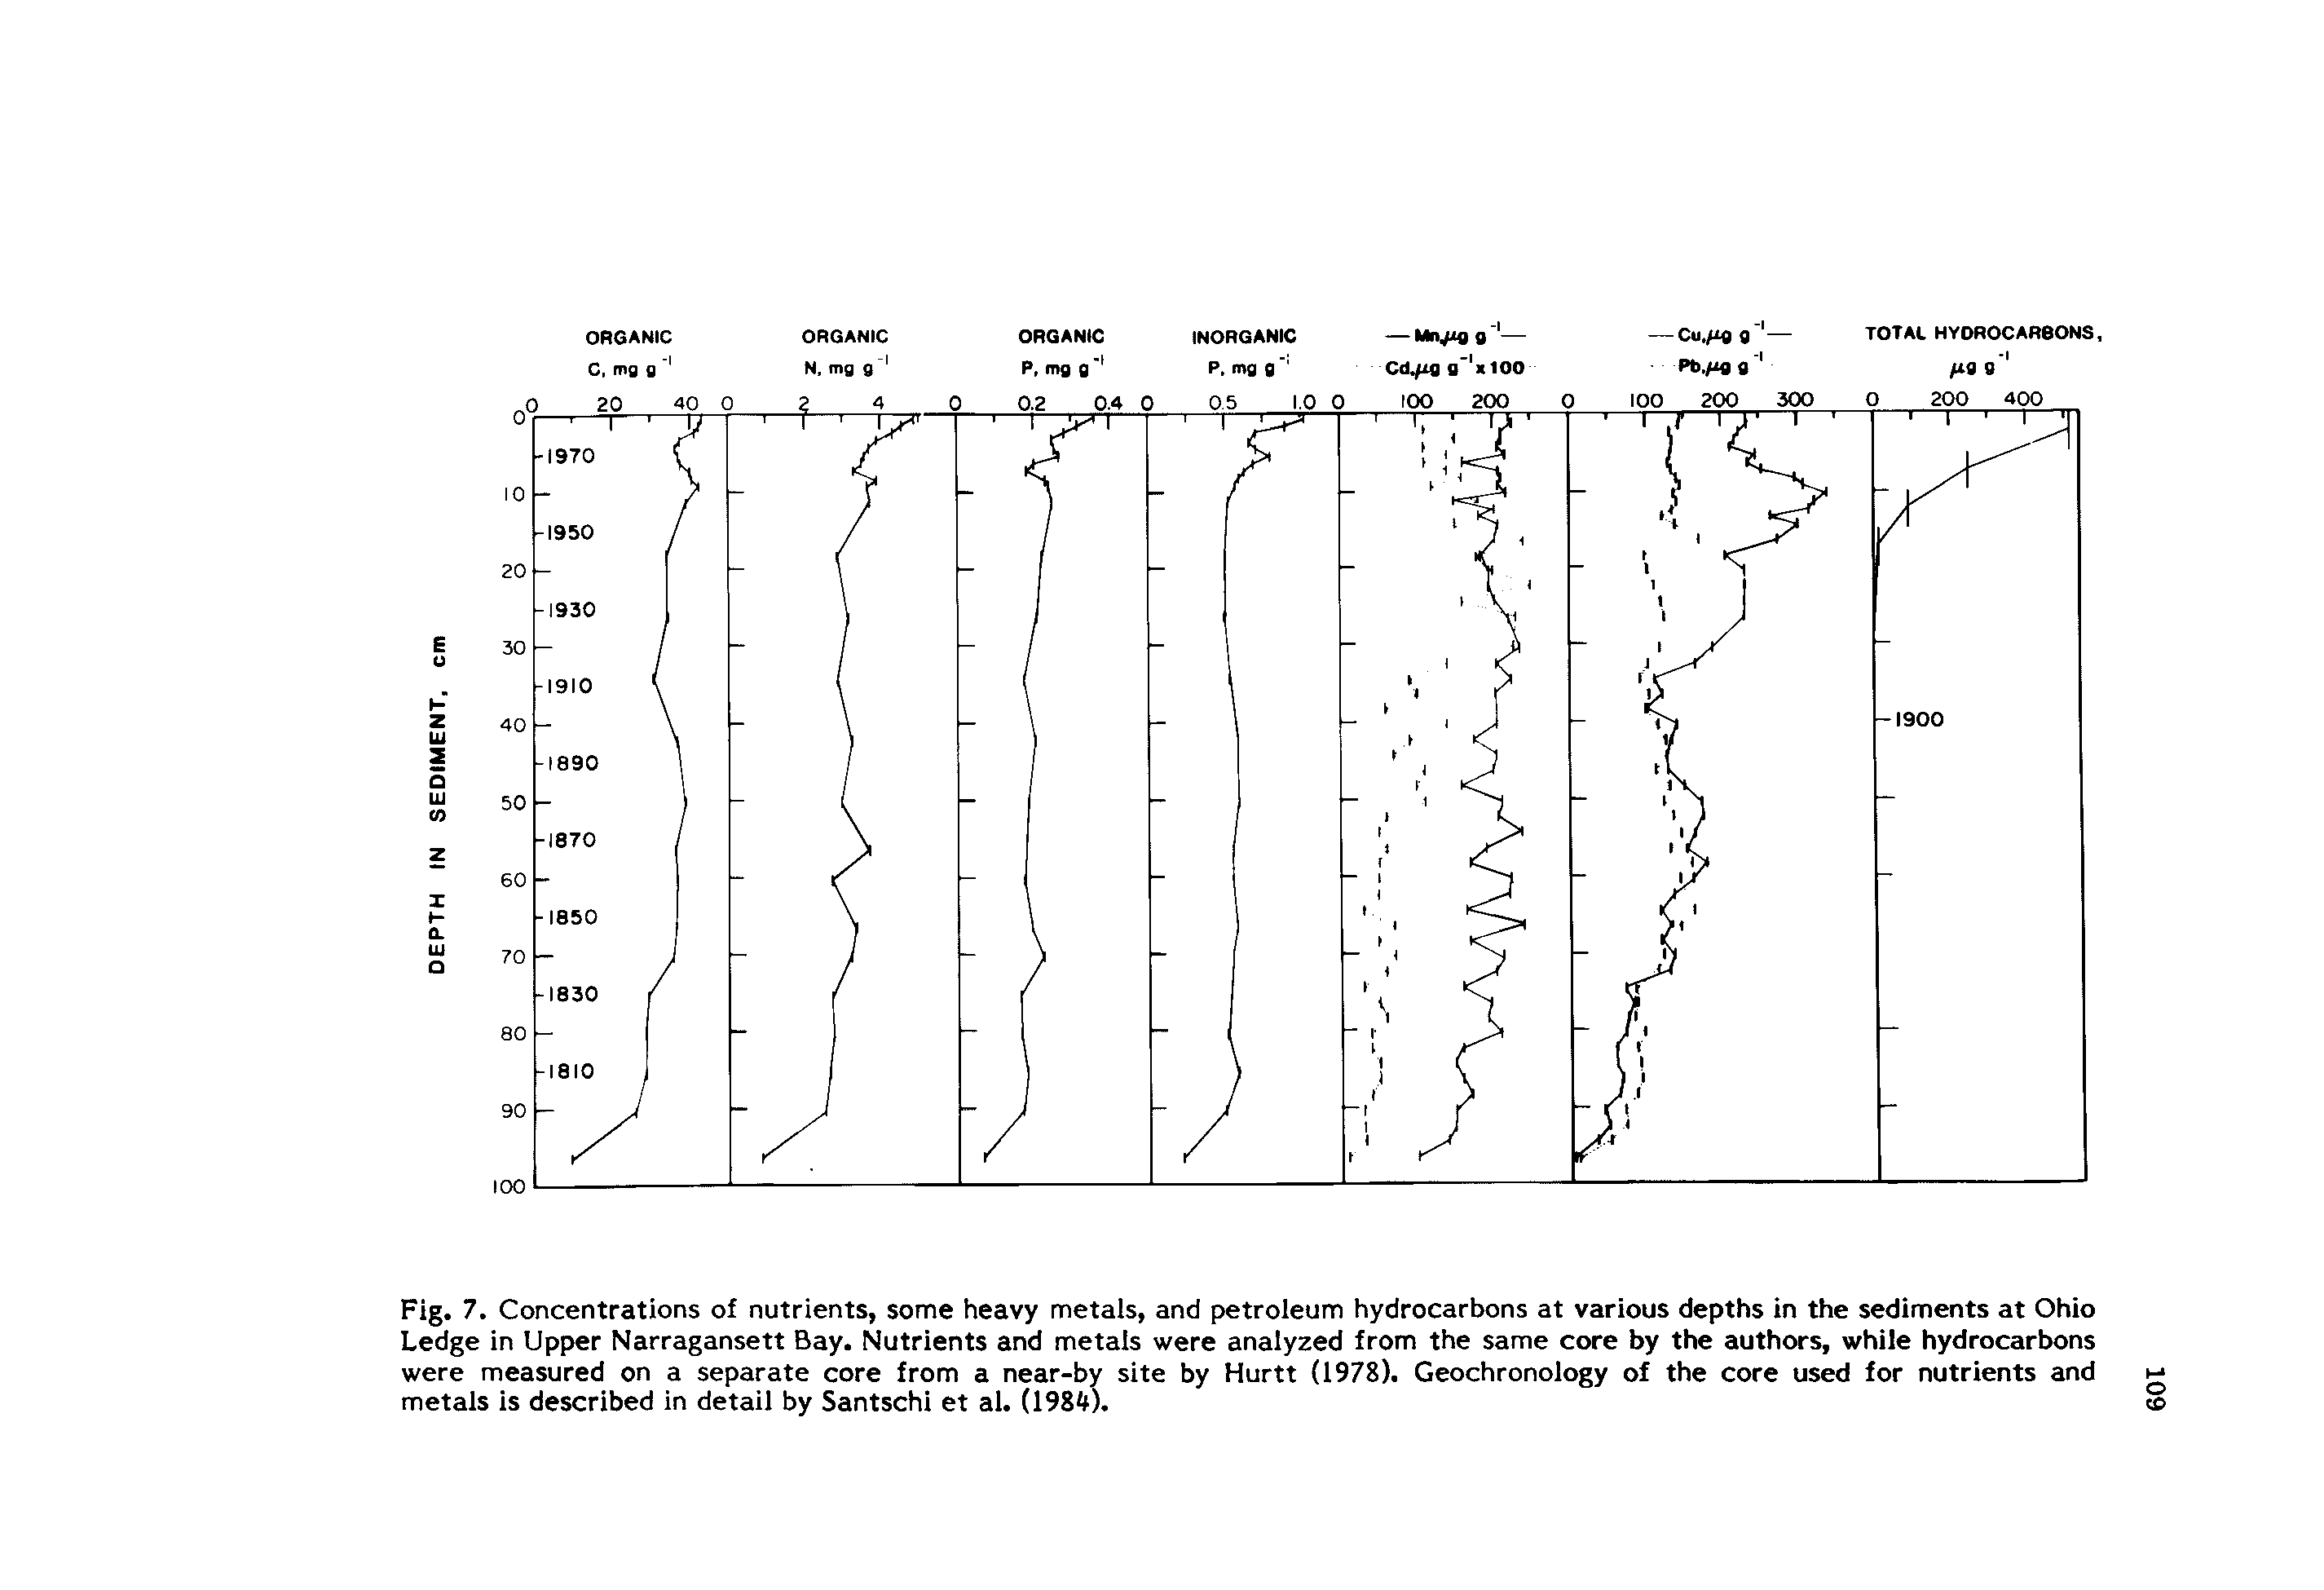 Fig. 7. Concentrations of nutrients, some heavy metals, and petroleum hydrocarbons at various depths in the sediments at Ohio Ledge in Upper Narragansett Bay. Nutrients and metals were analyzed from the same core by the authors, while hydrocarbons were measured on a separate core from a near-by site by Hurtt (1978). Geochronology of the core used for nutrients and metals is described in detail by Santschi et al. (198< ).